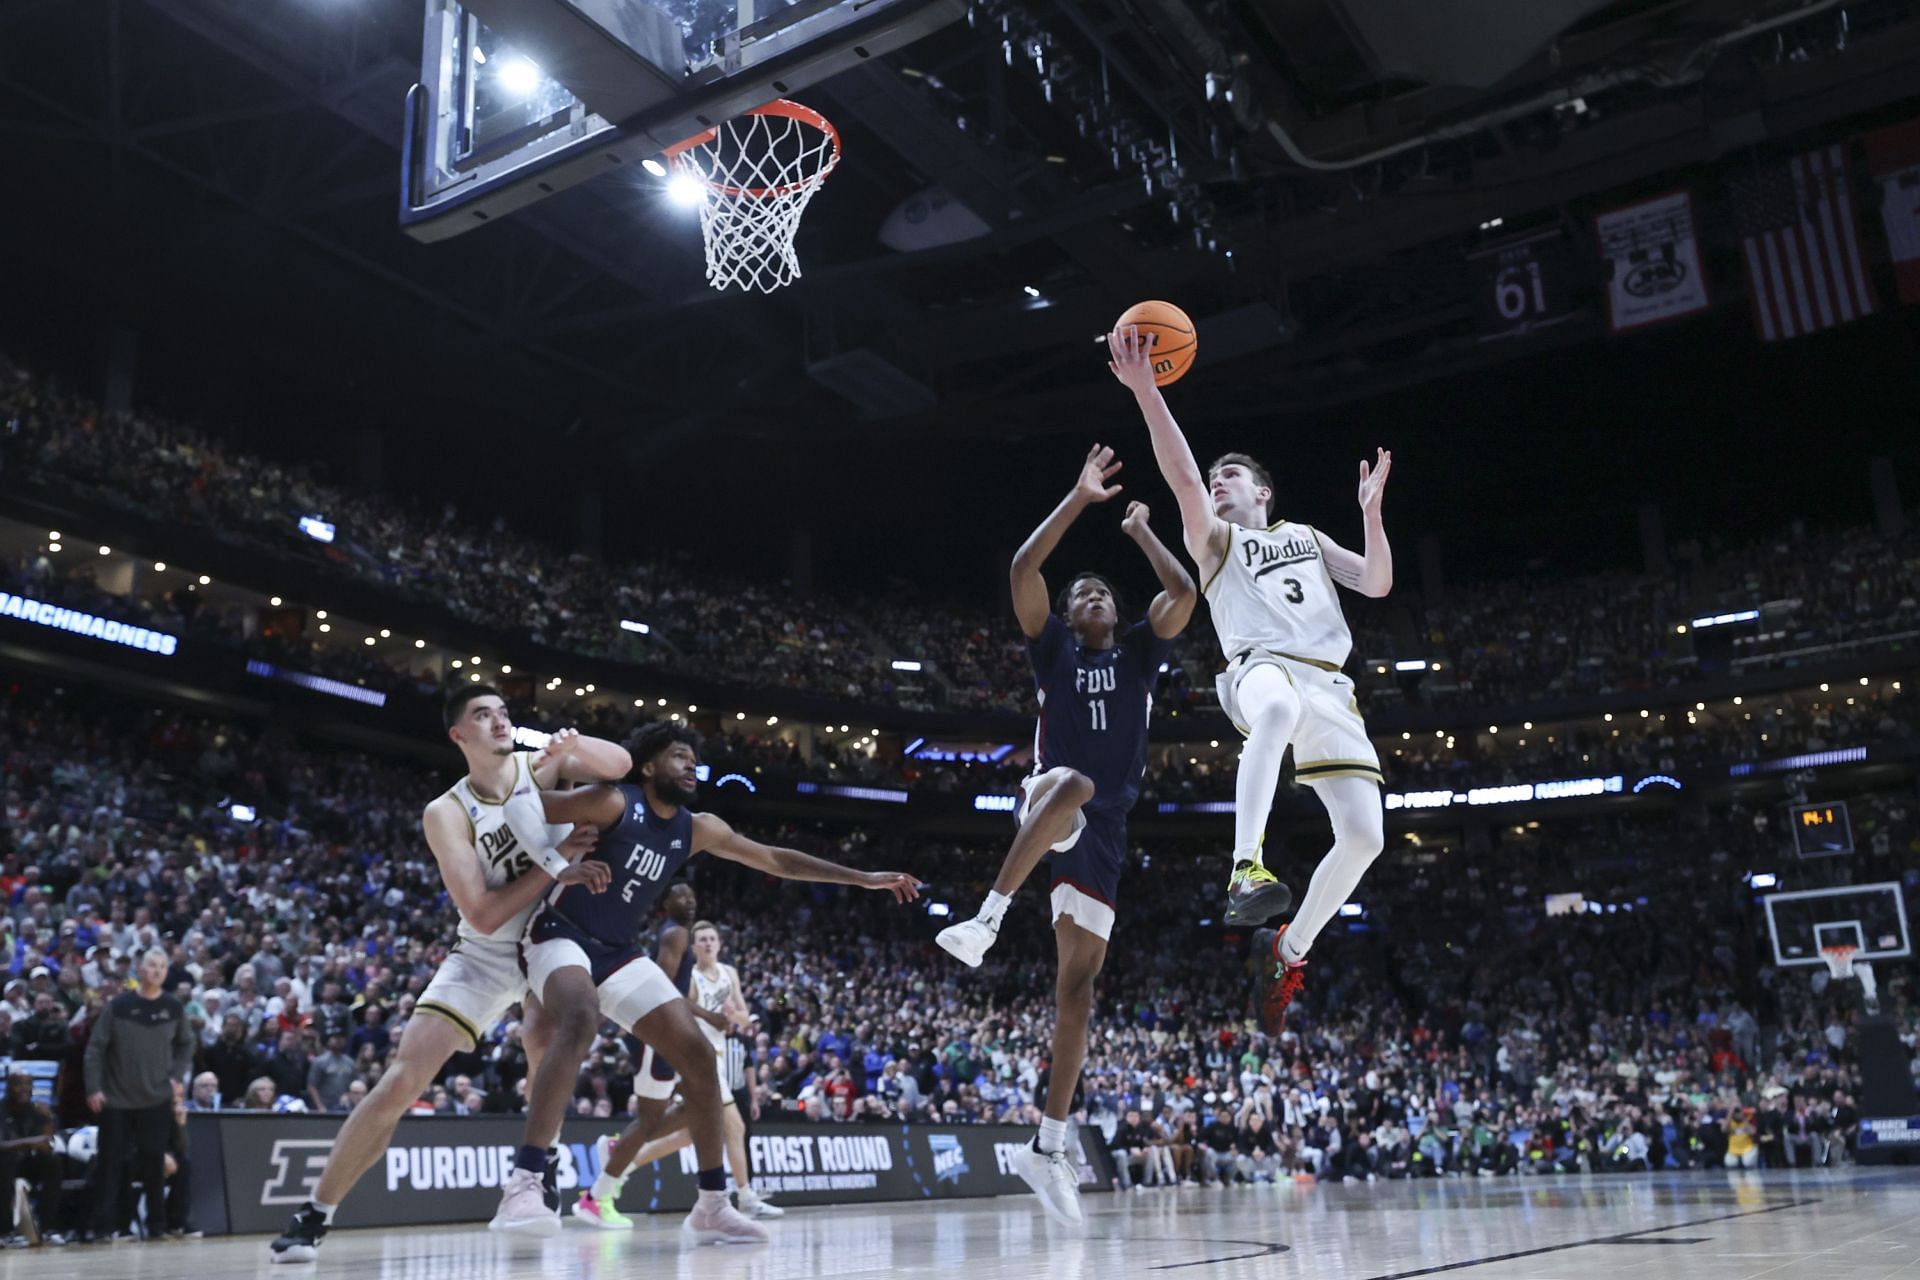 Purdue lost to FDU in the opening round of the tournament (Image via Getty Images)